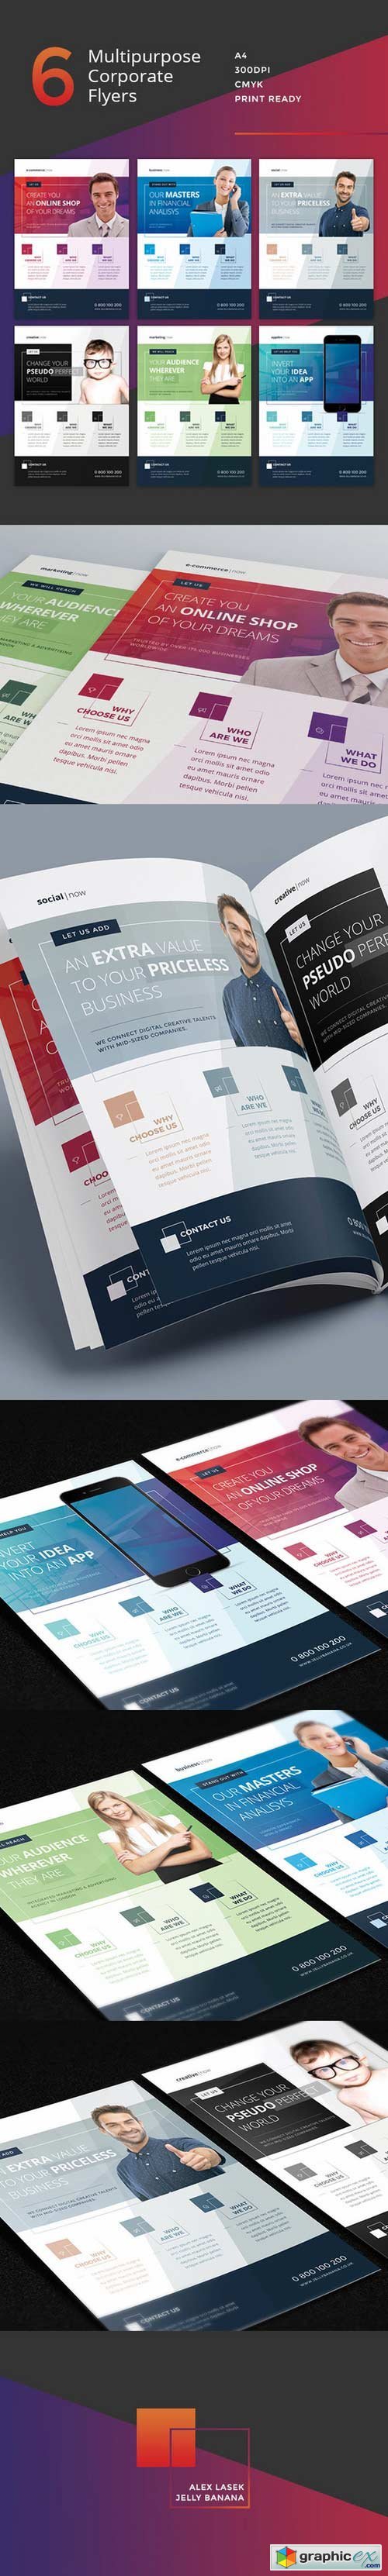 6 Multipurpose Business Flyers, Ads